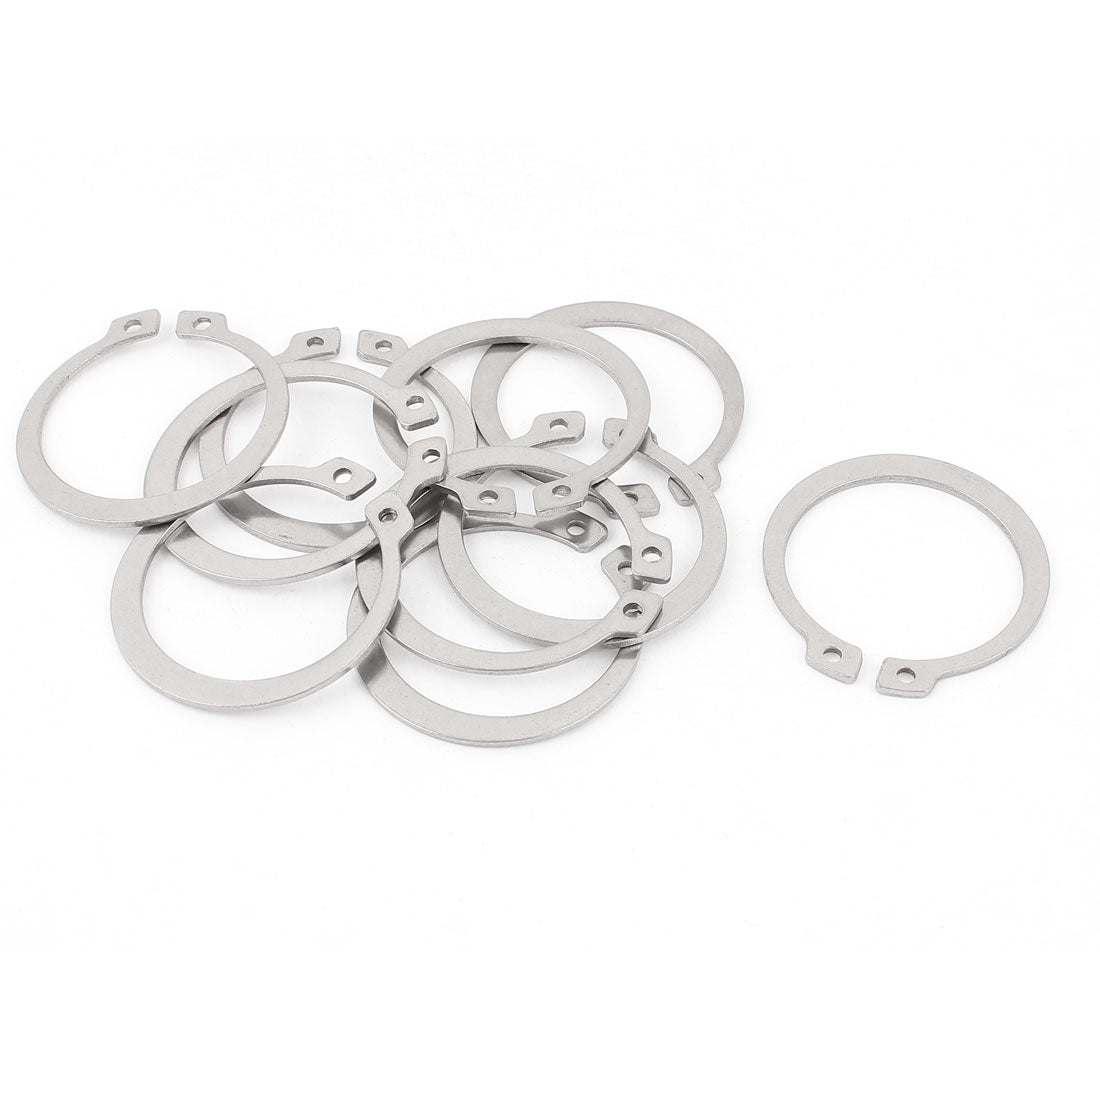 uxcell Uxcell 10pcs 304 Stainless Steel External Circlip Retaining Shaft Snap Rings 40mm